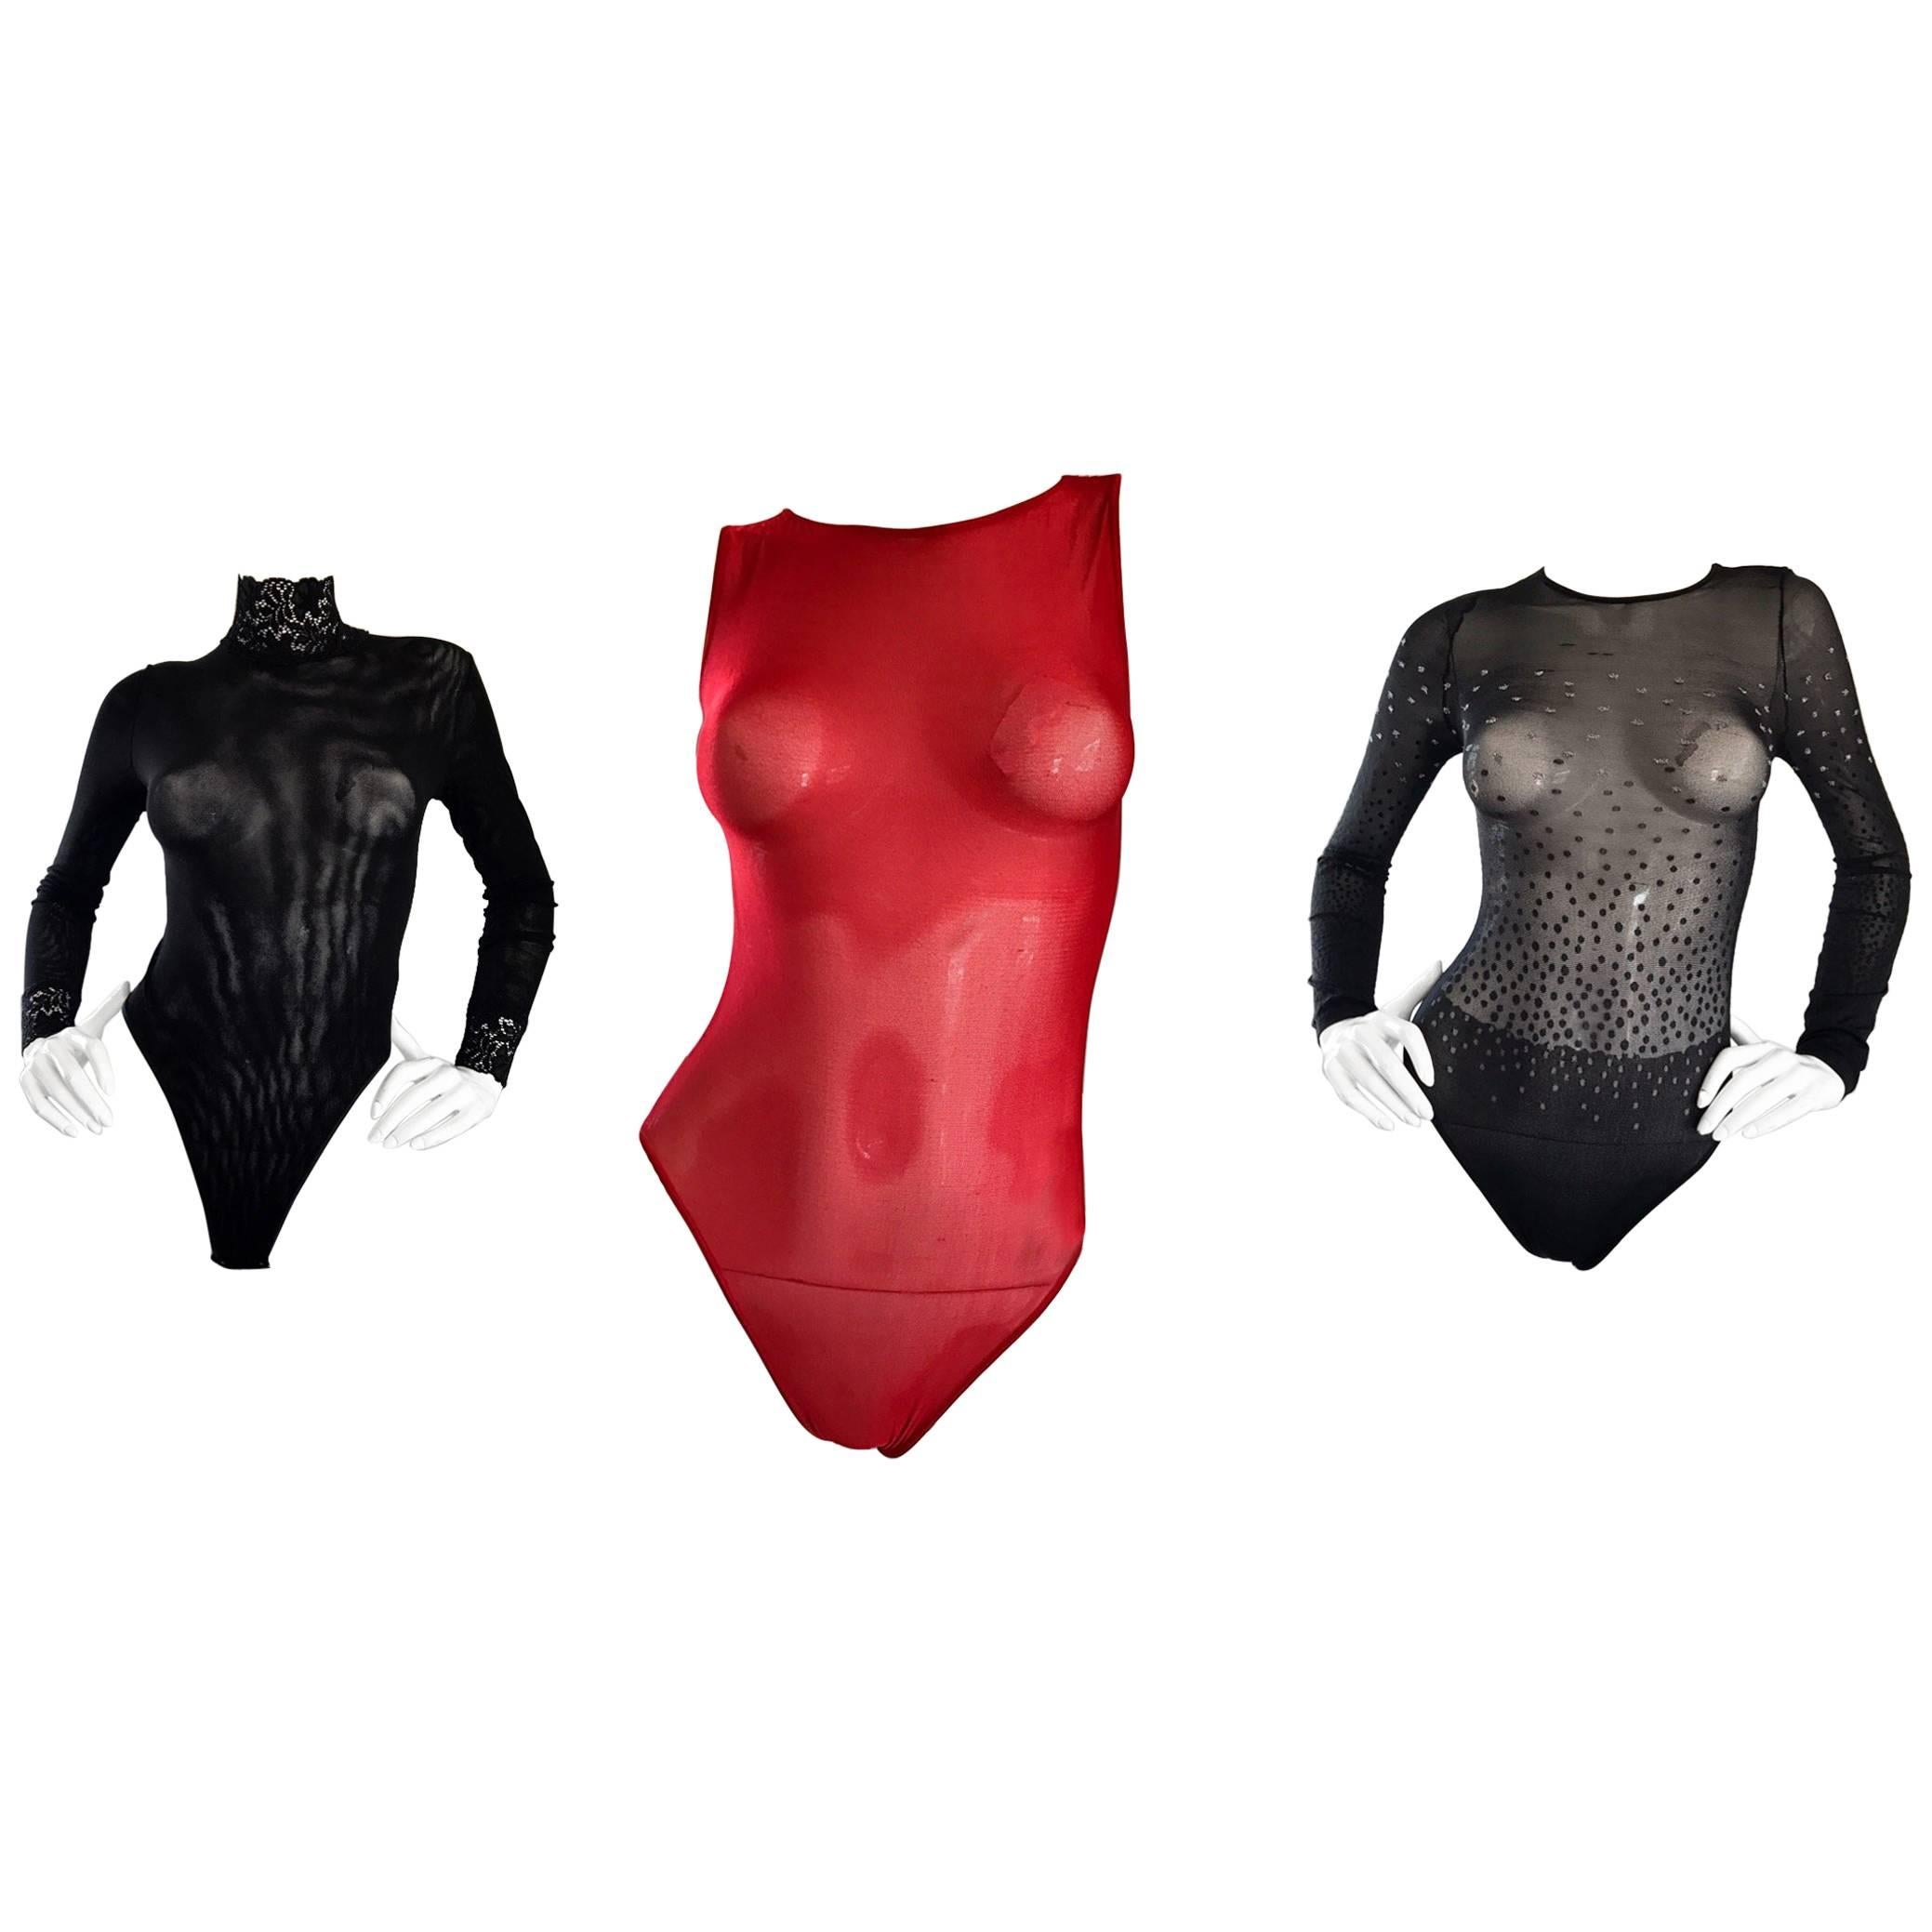 Lot of 3 Brand New Wolford & Italian Black, Red, and Silver Semi Sheer Bodysuits